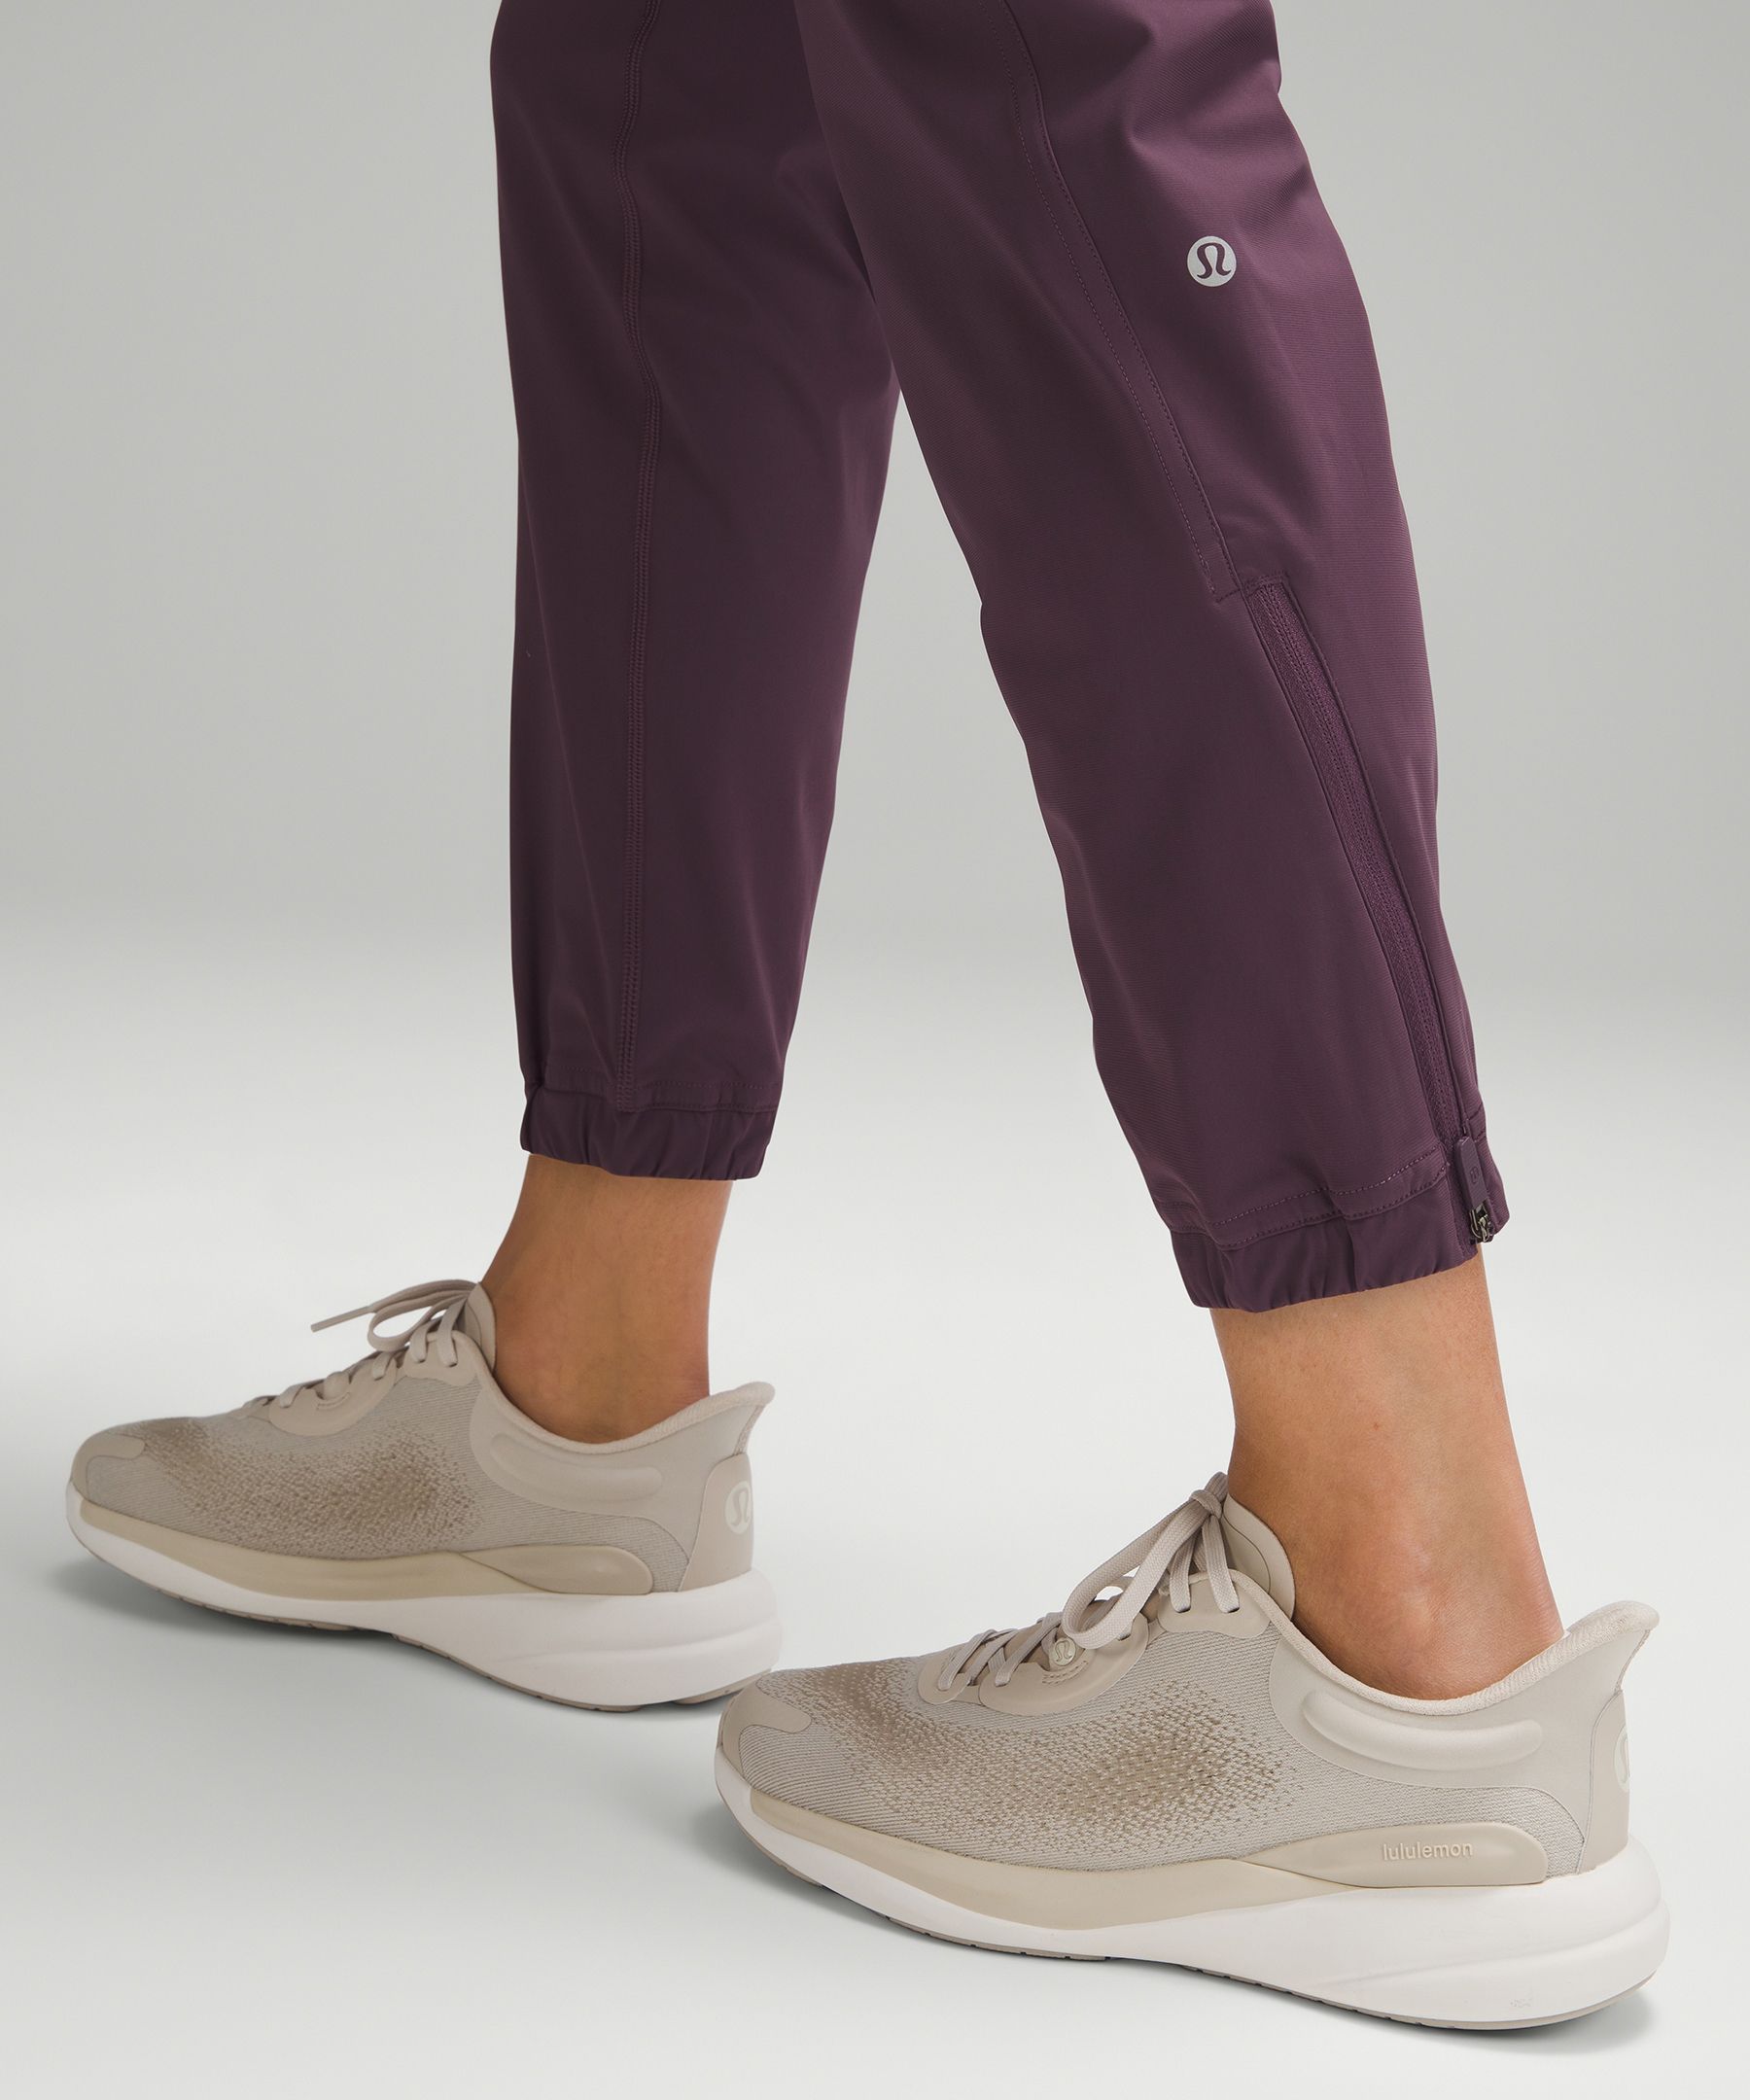 Back In Action Jogger Lululemon Leggings  International Society of  Precision Agriculture